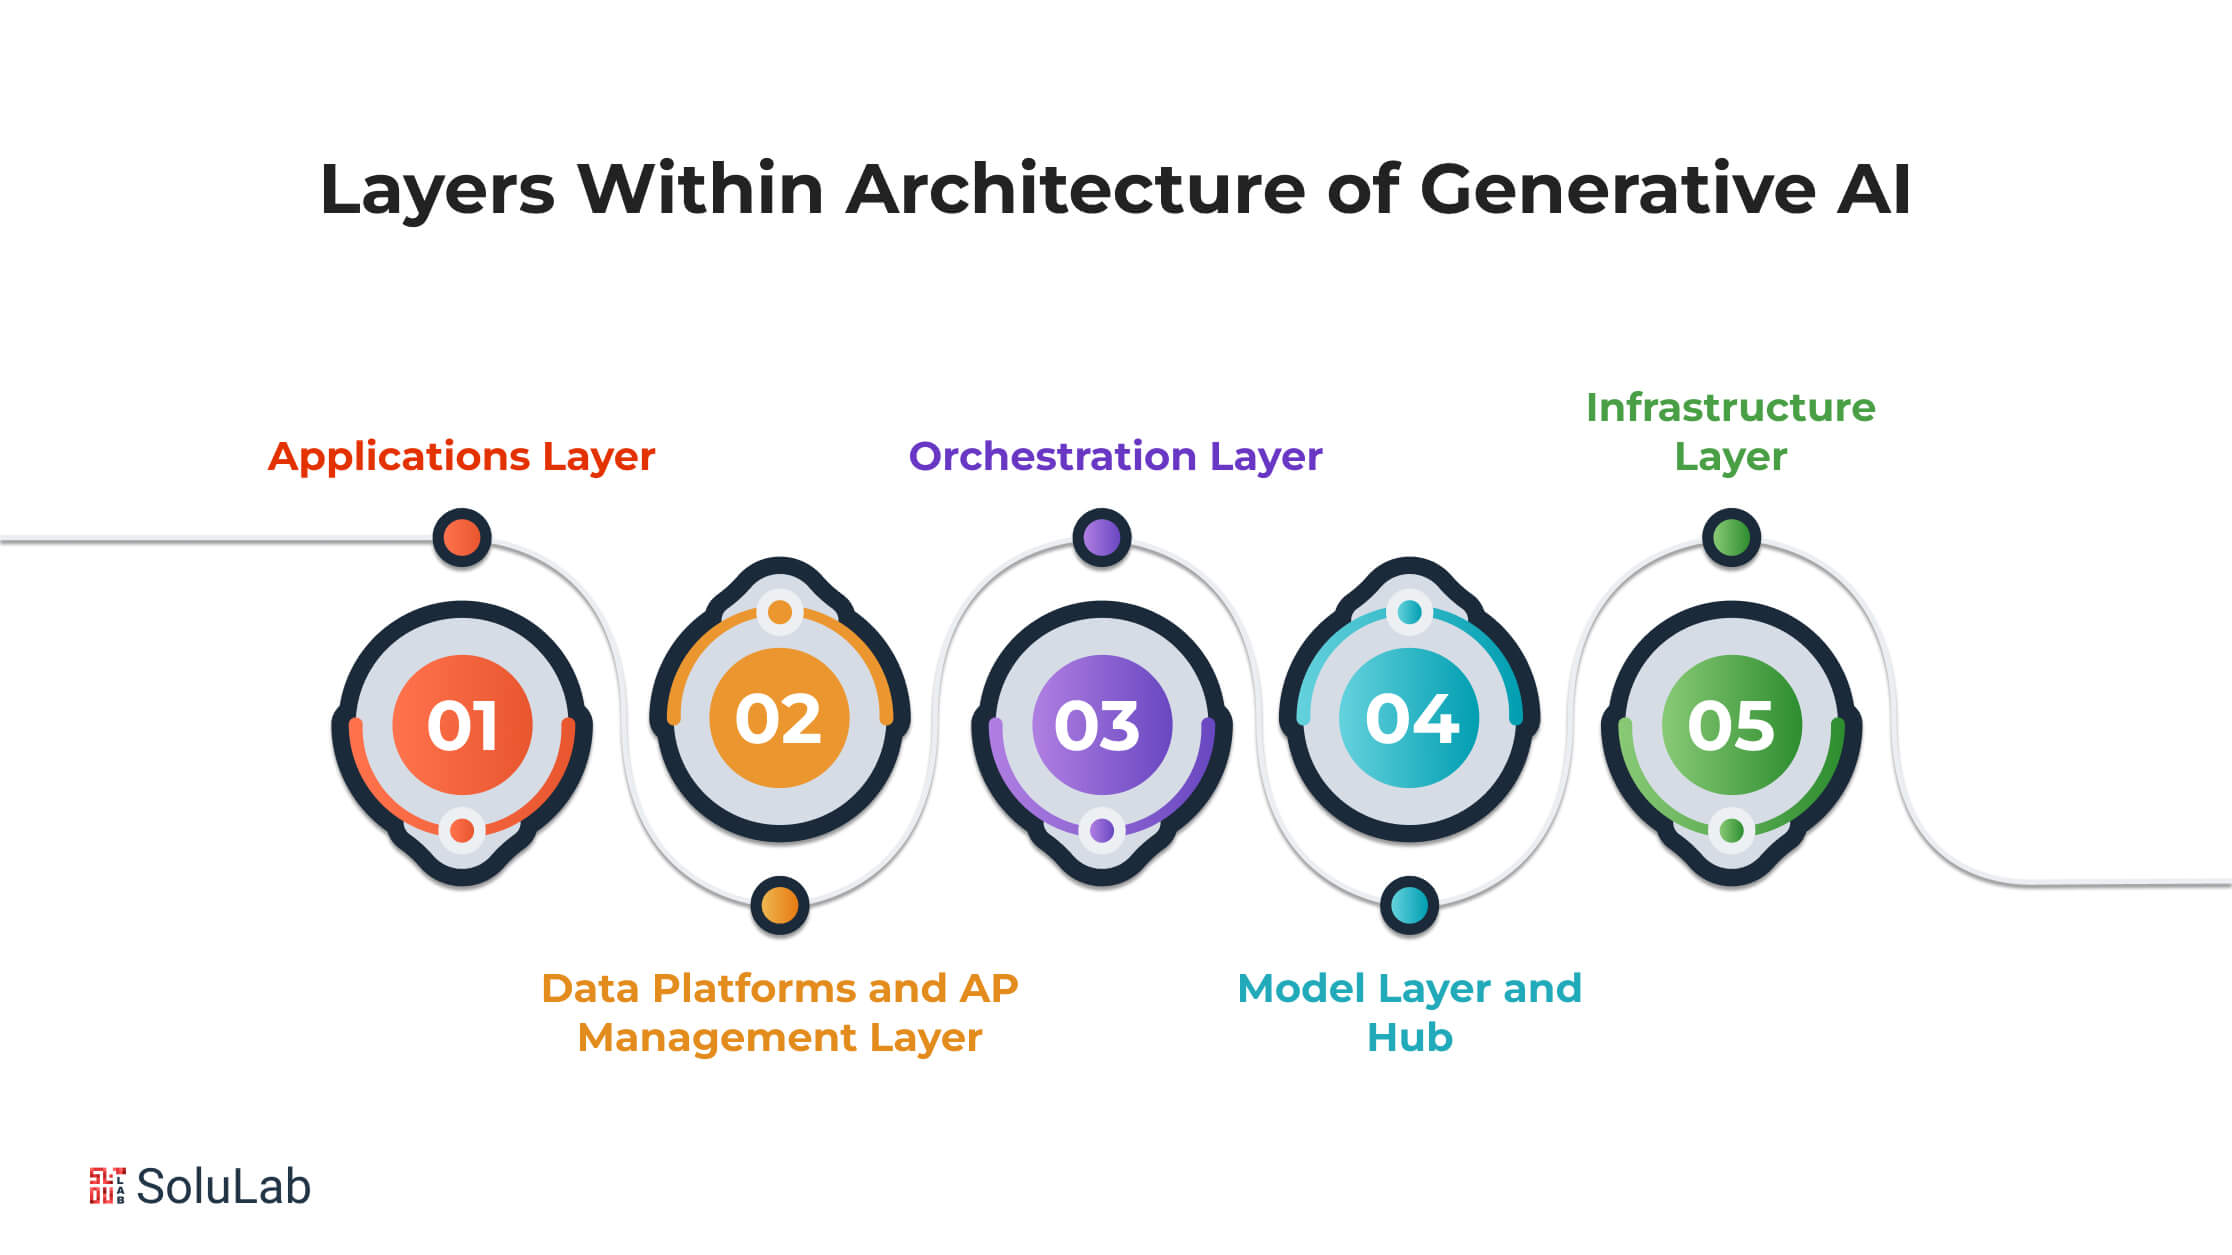 Layers Within Architecture of Generative AI